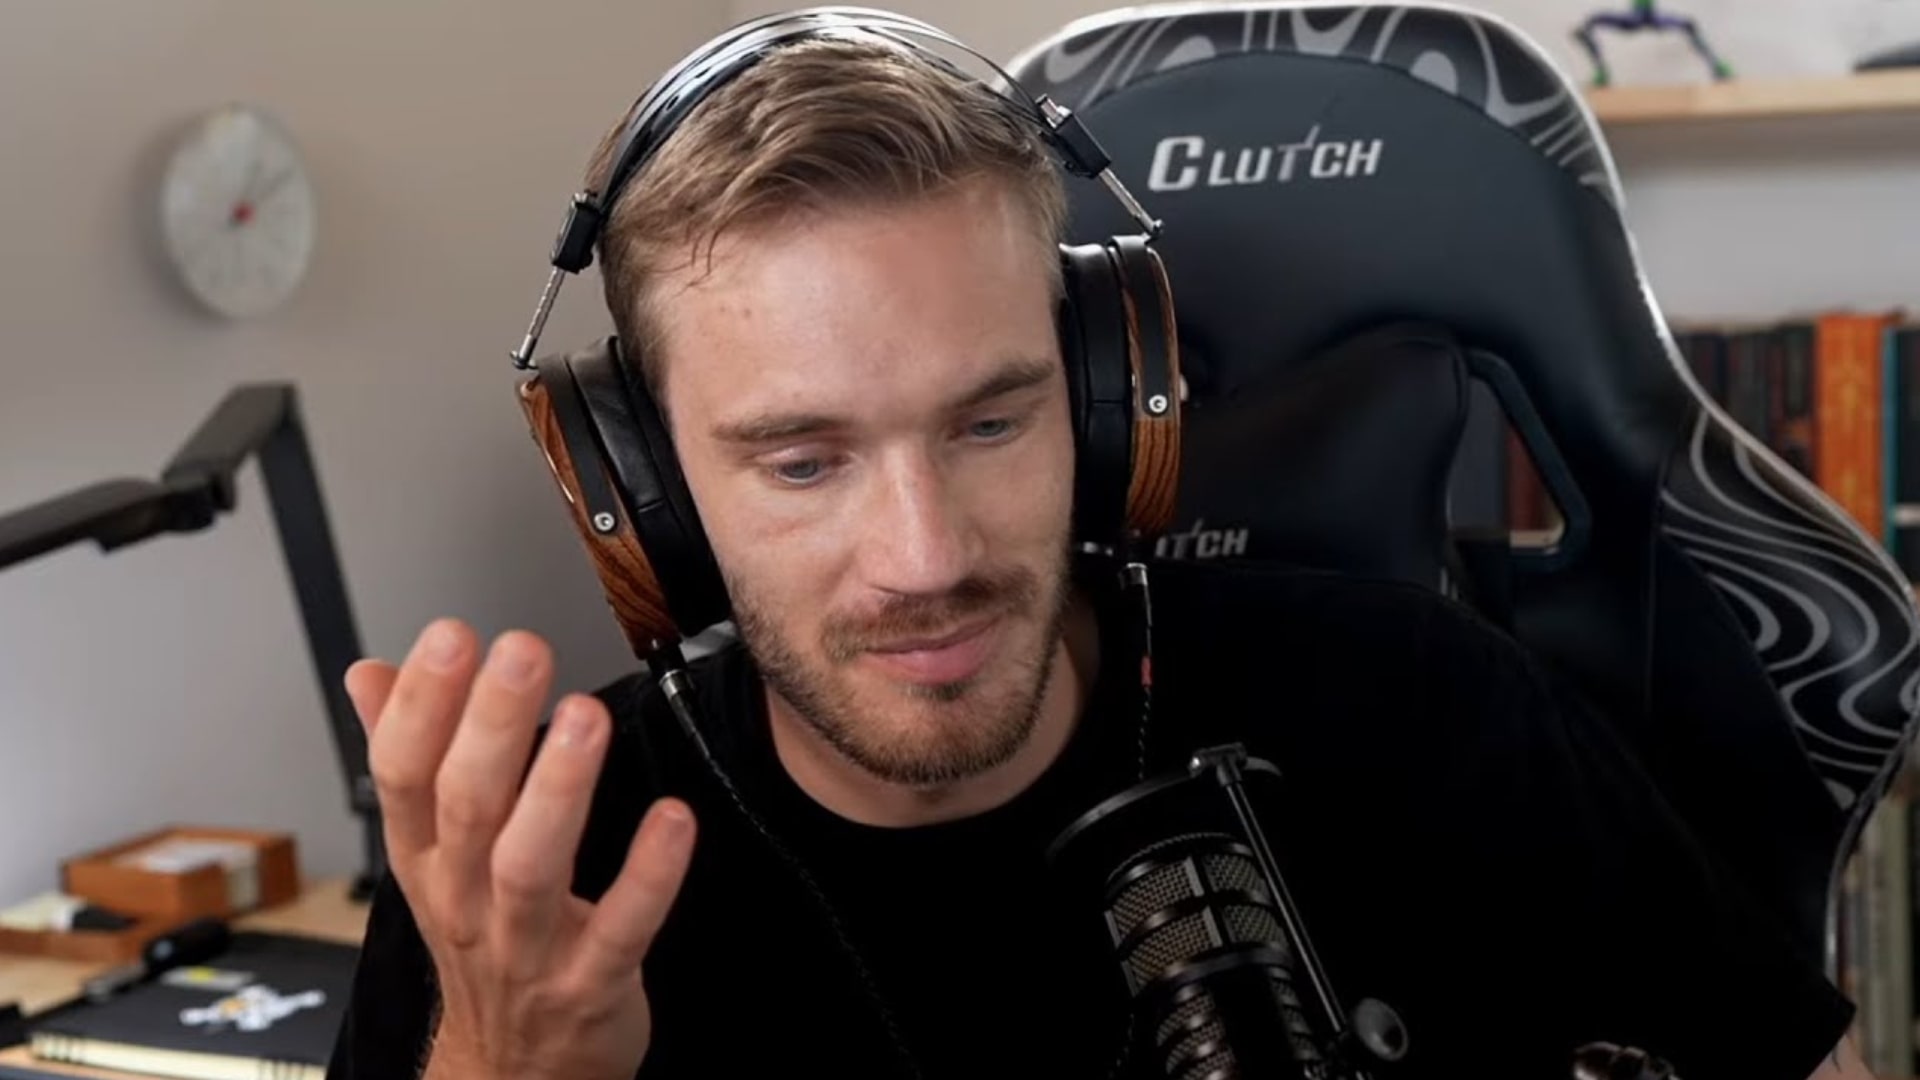 PewDiePie on Dota: ‘League of Legends wouldn’t exist without it’ - ONE Esports